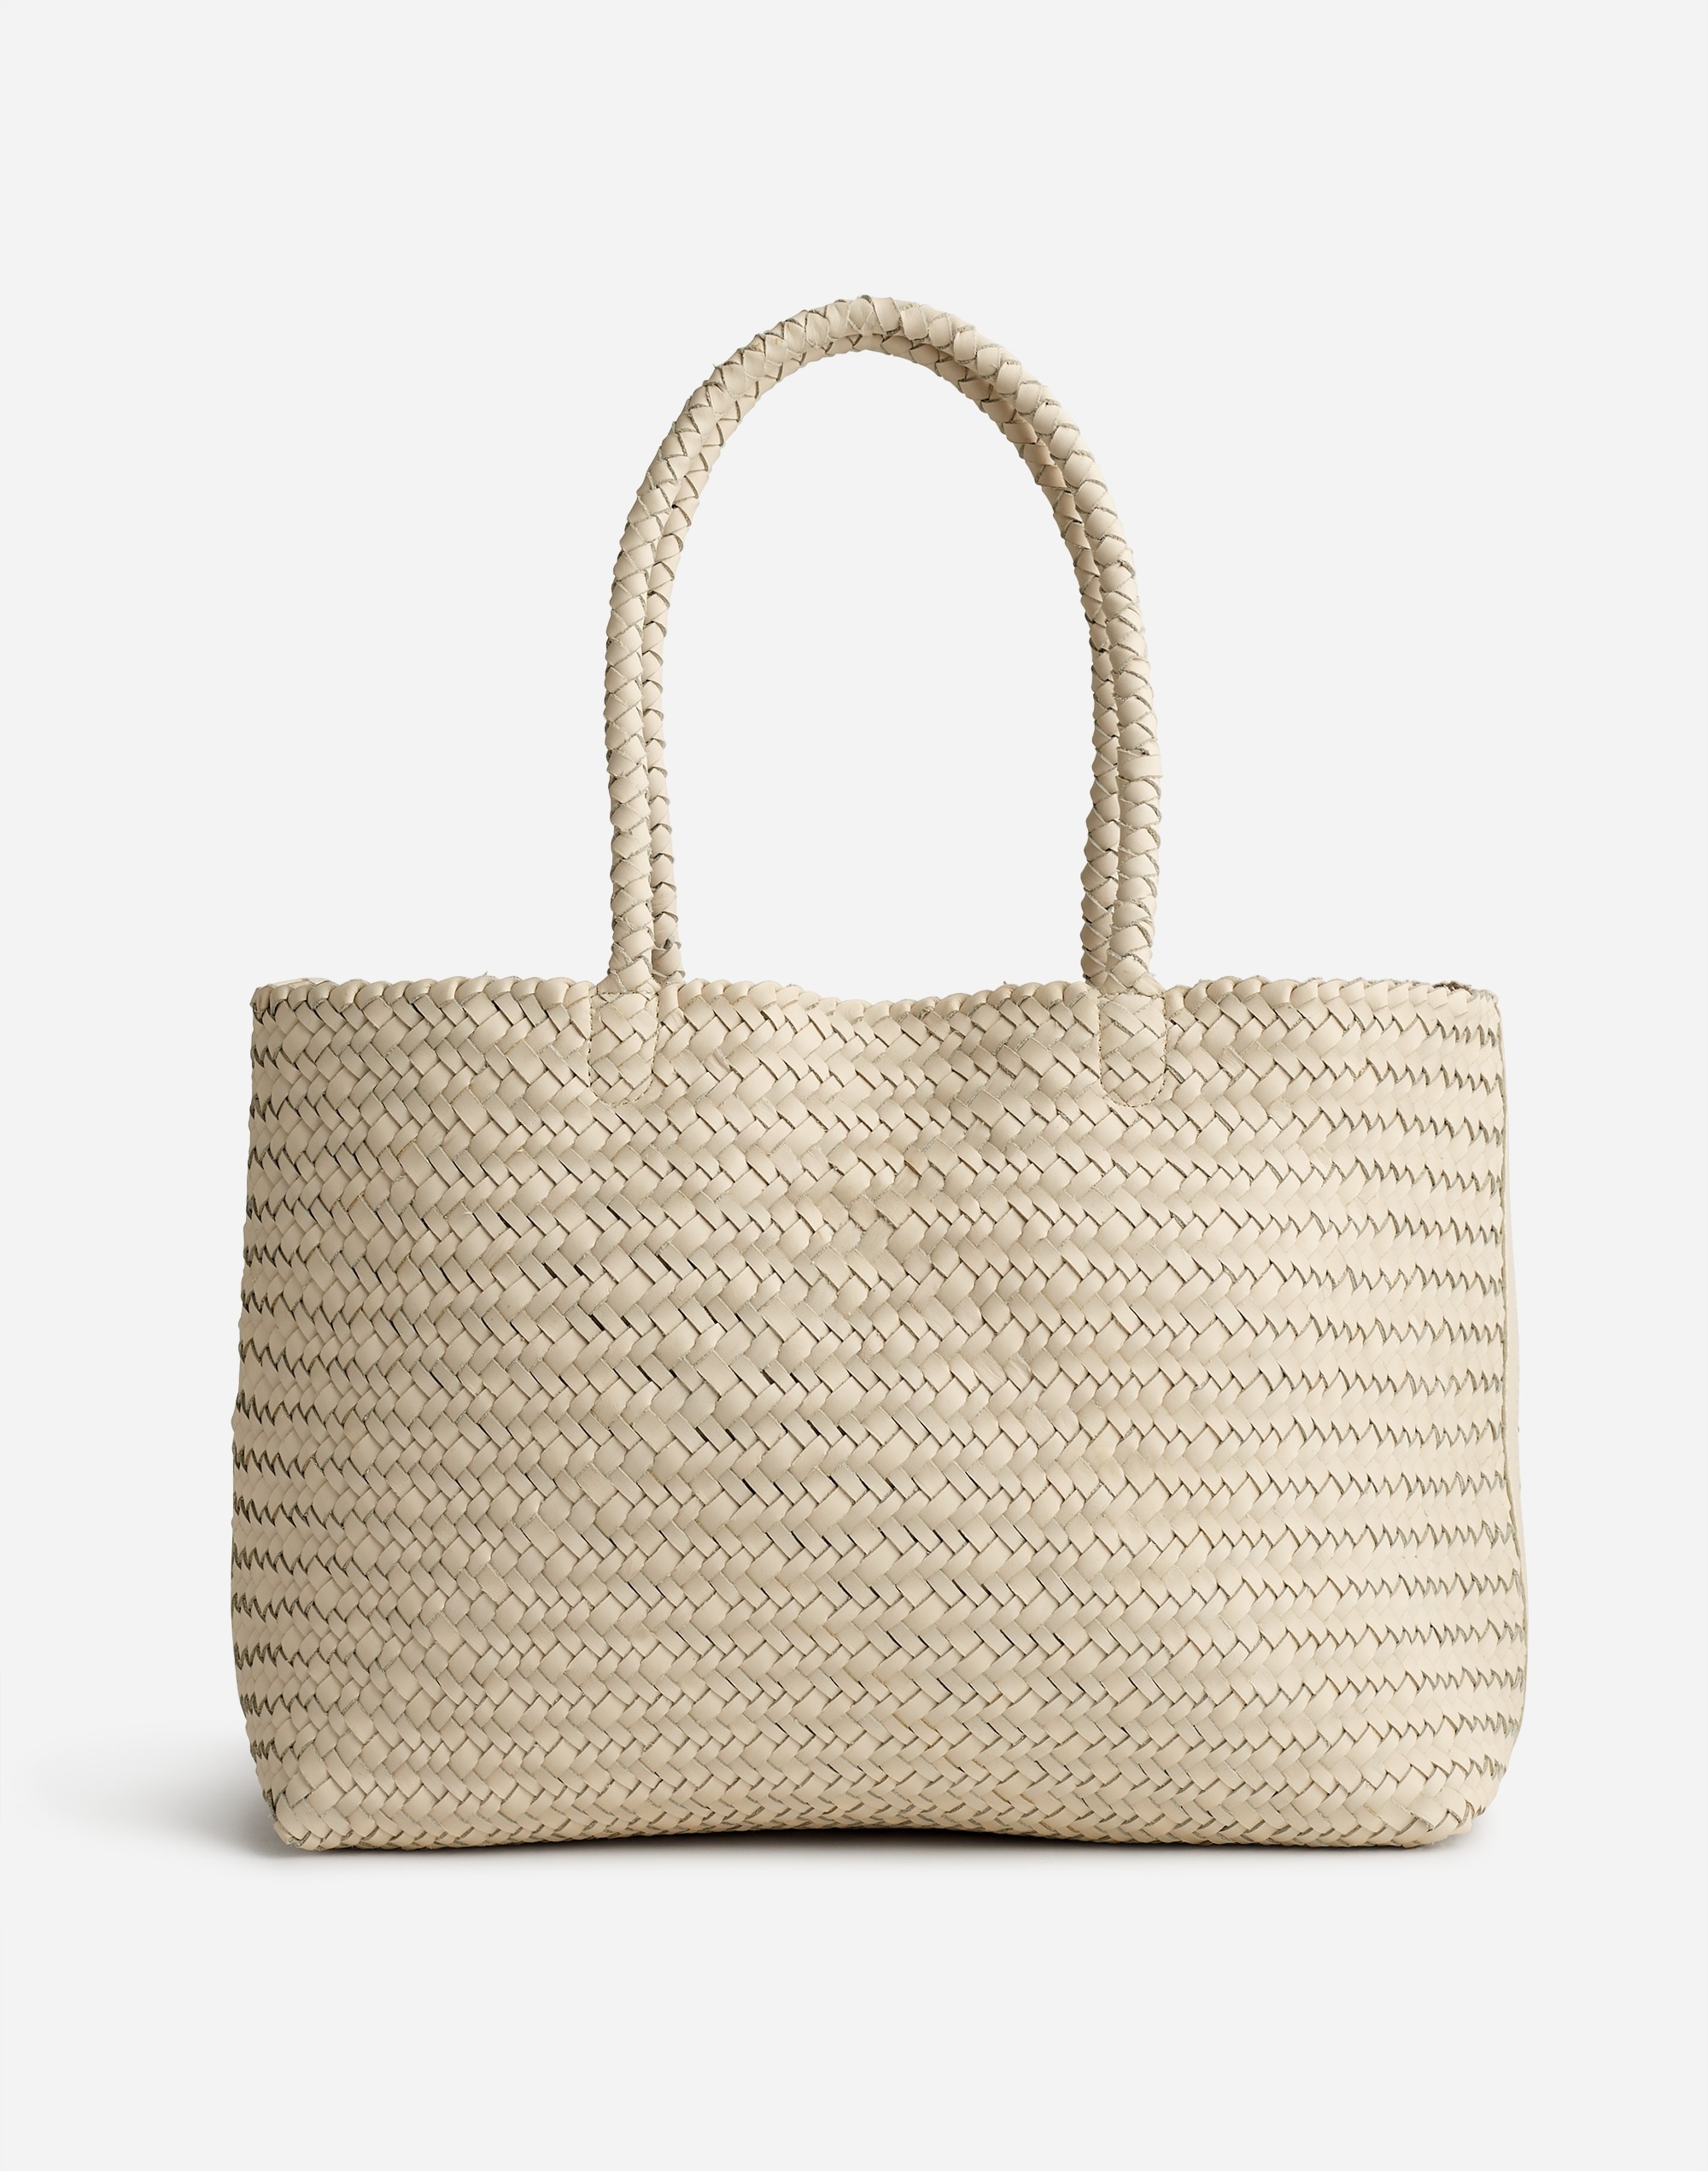 Mw Handwoven Leather Tote In Neutral